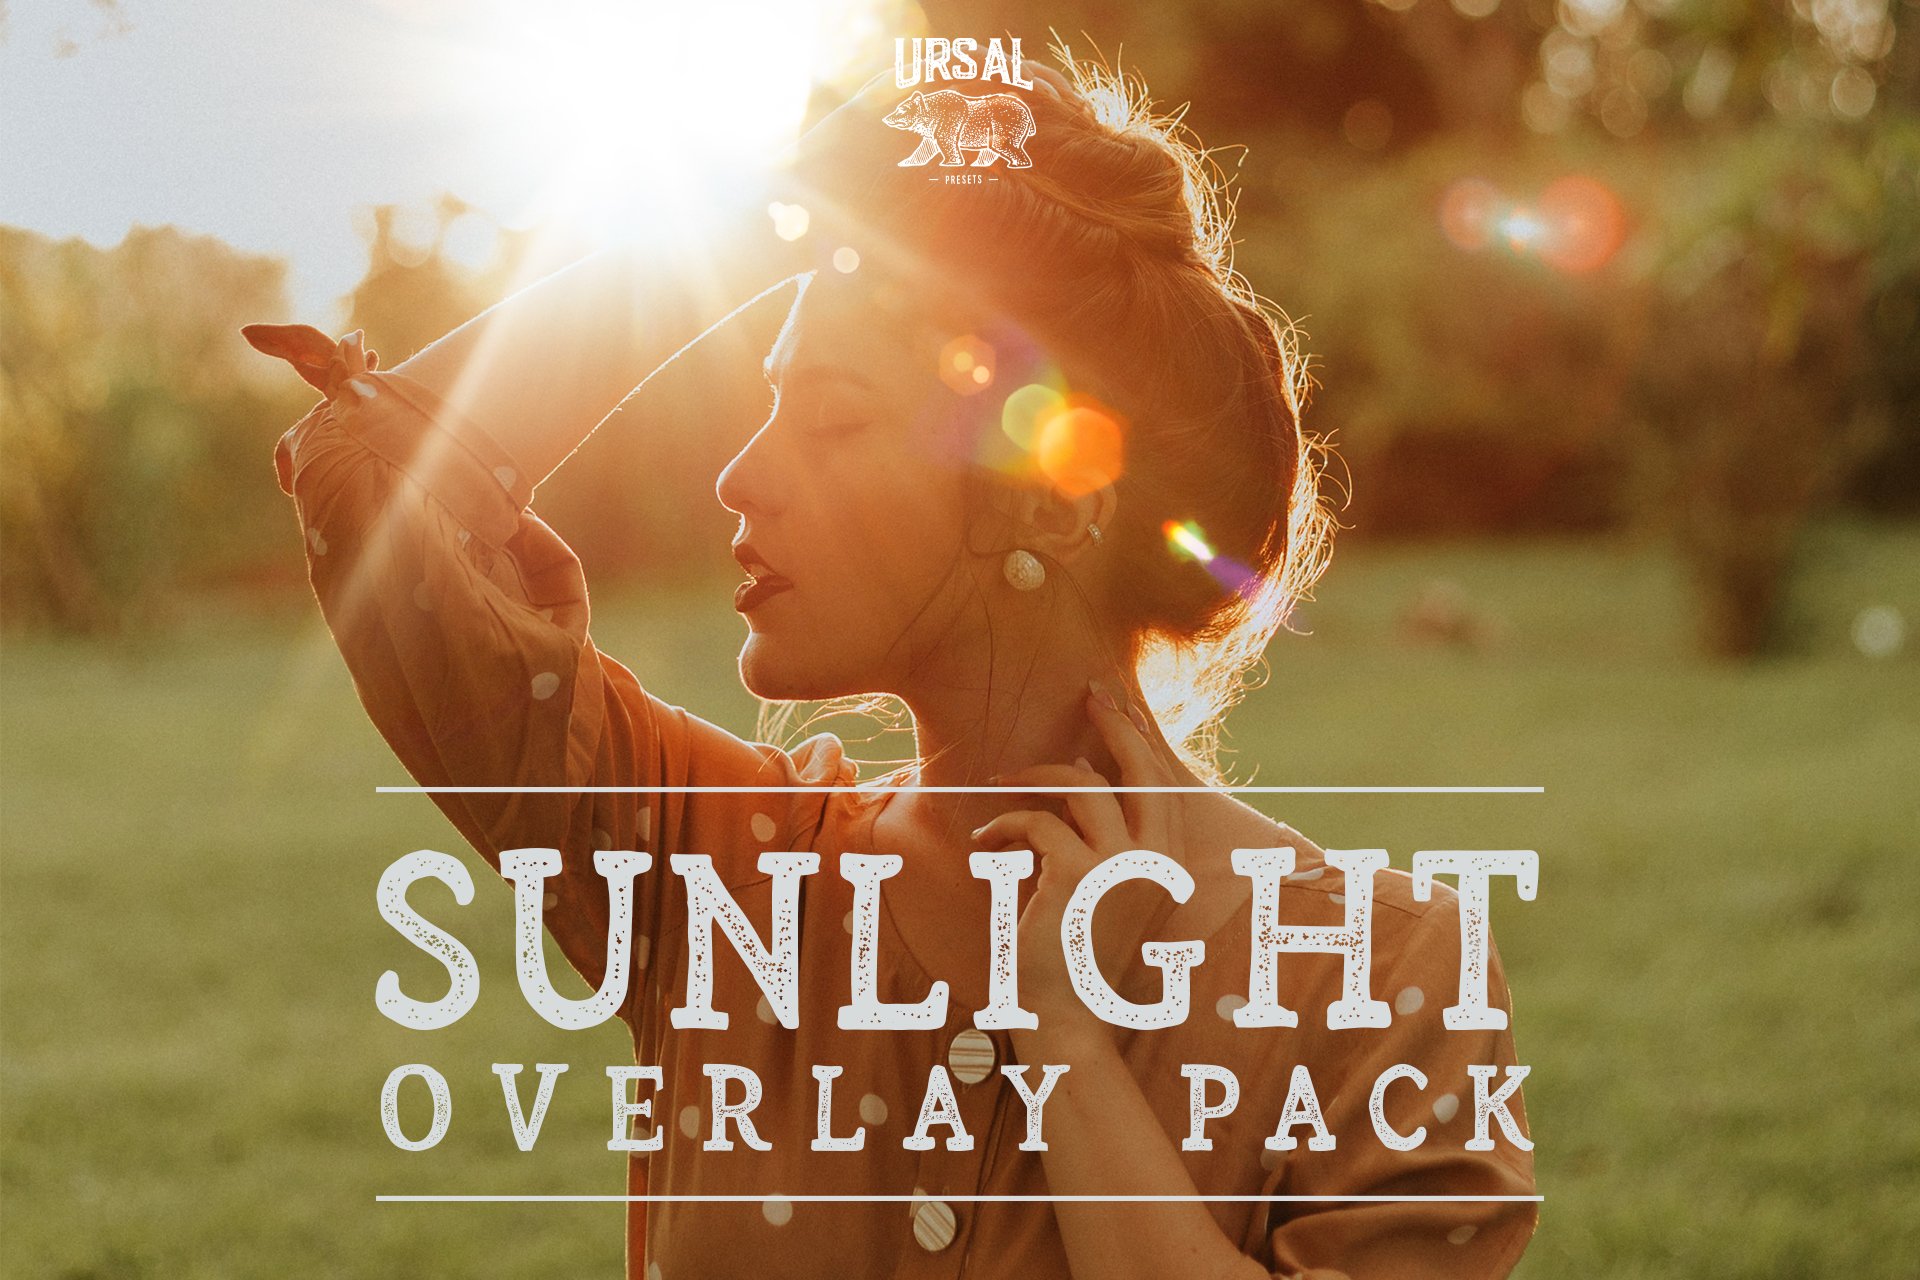 Sunlight Flare Overlay Packcover image.